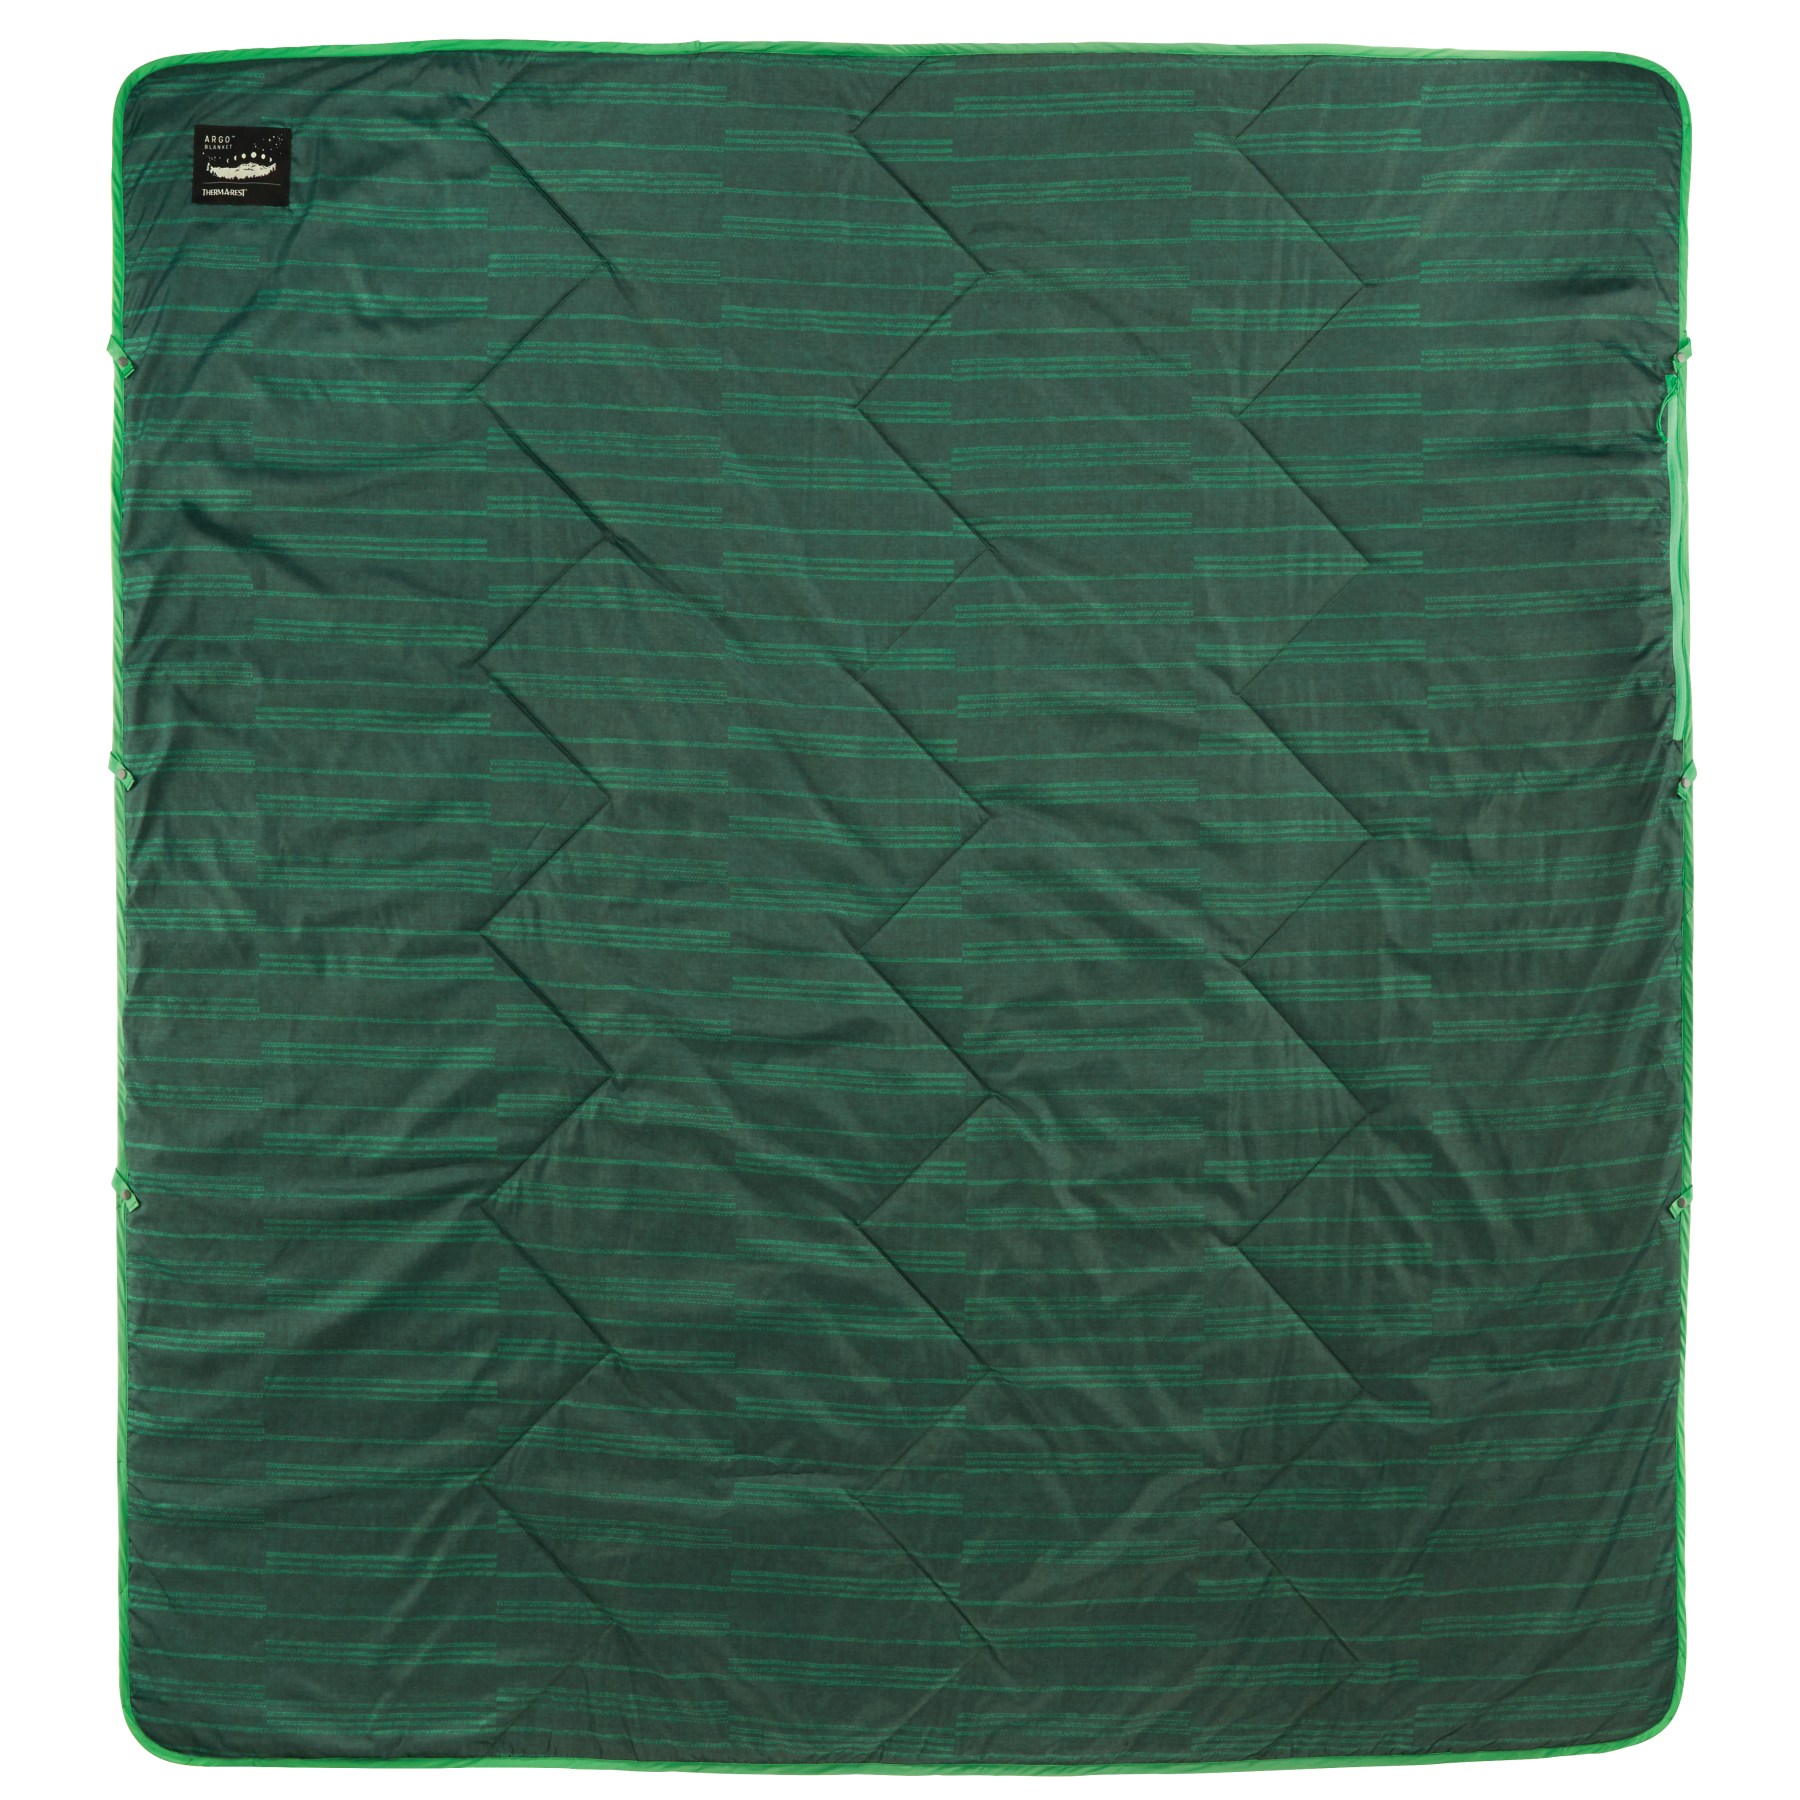 Picture of Therm-a-Rest Argo Blanket - Green Print